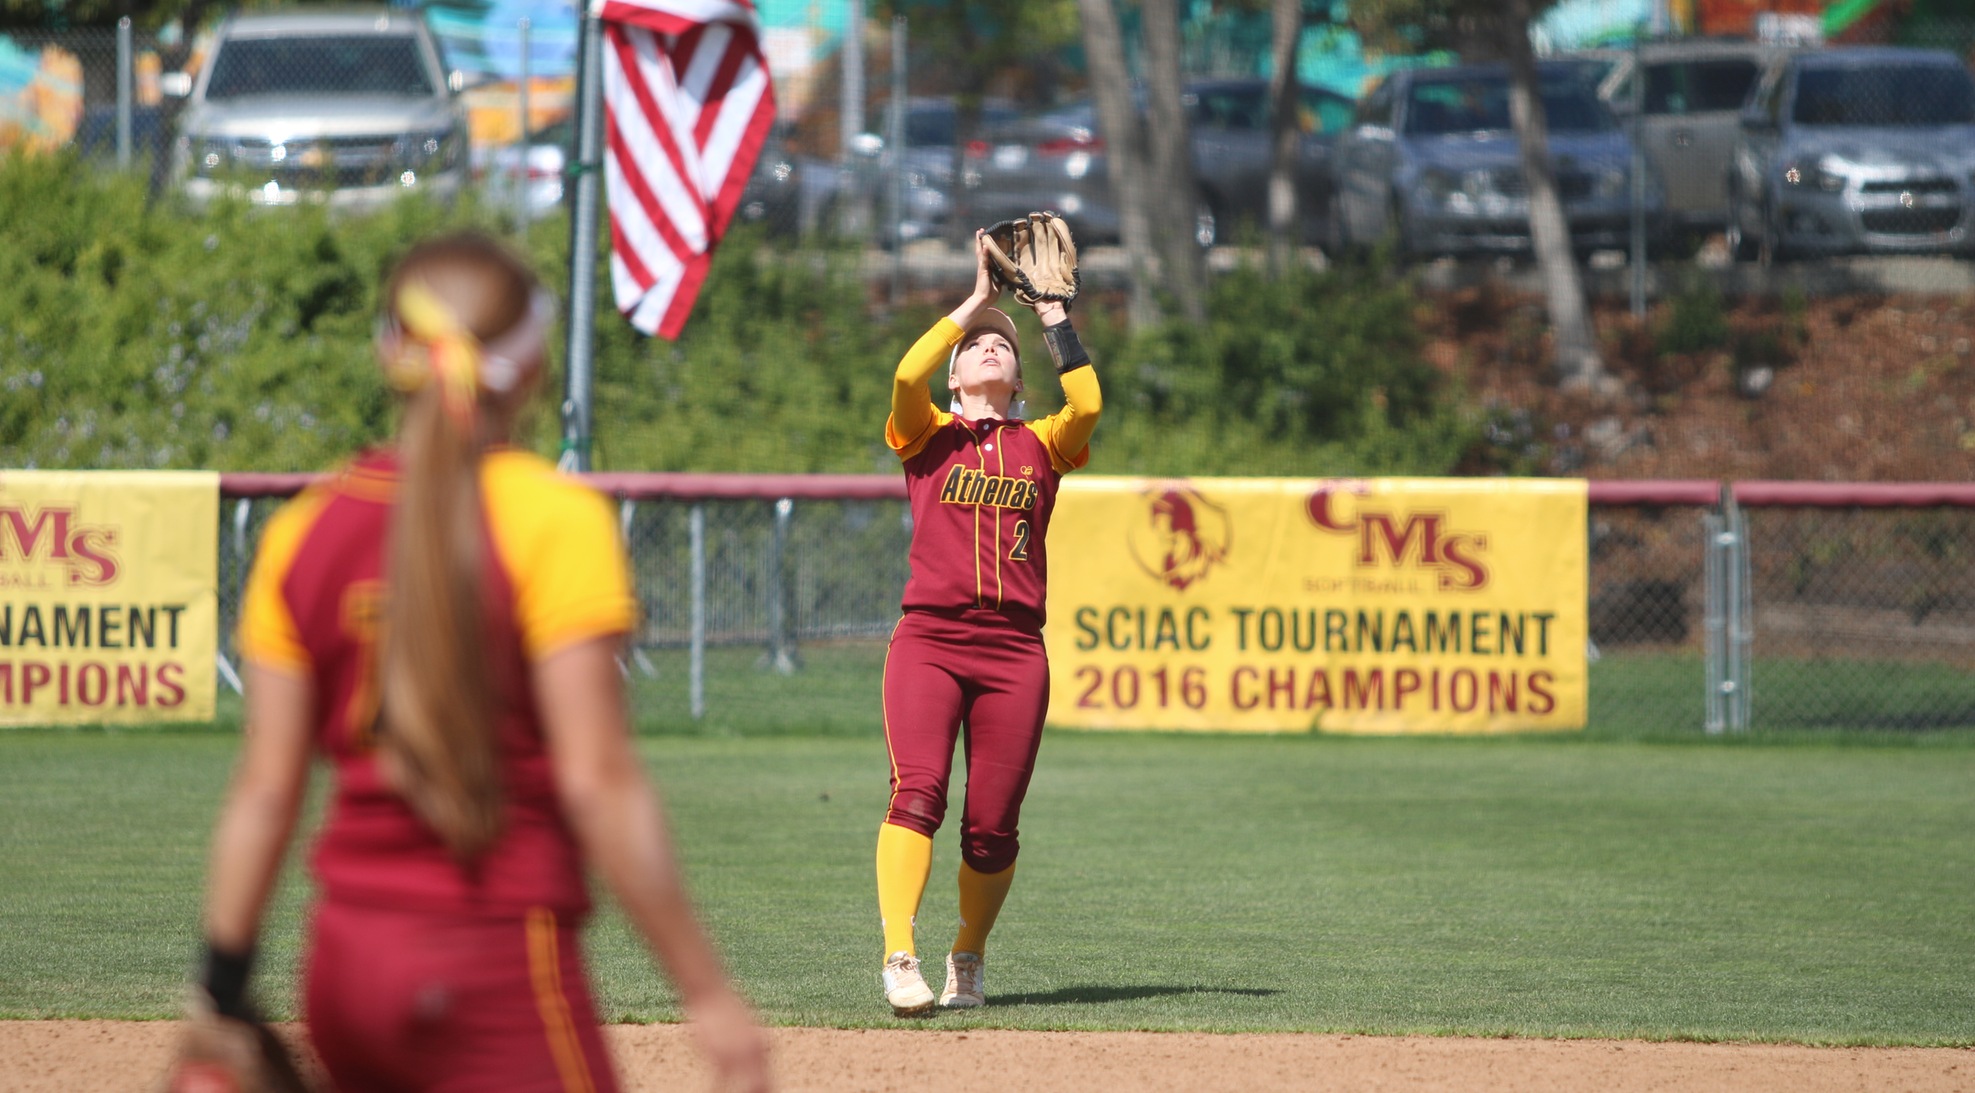 Softball Swept by Regals in SCIAC Doubleheader